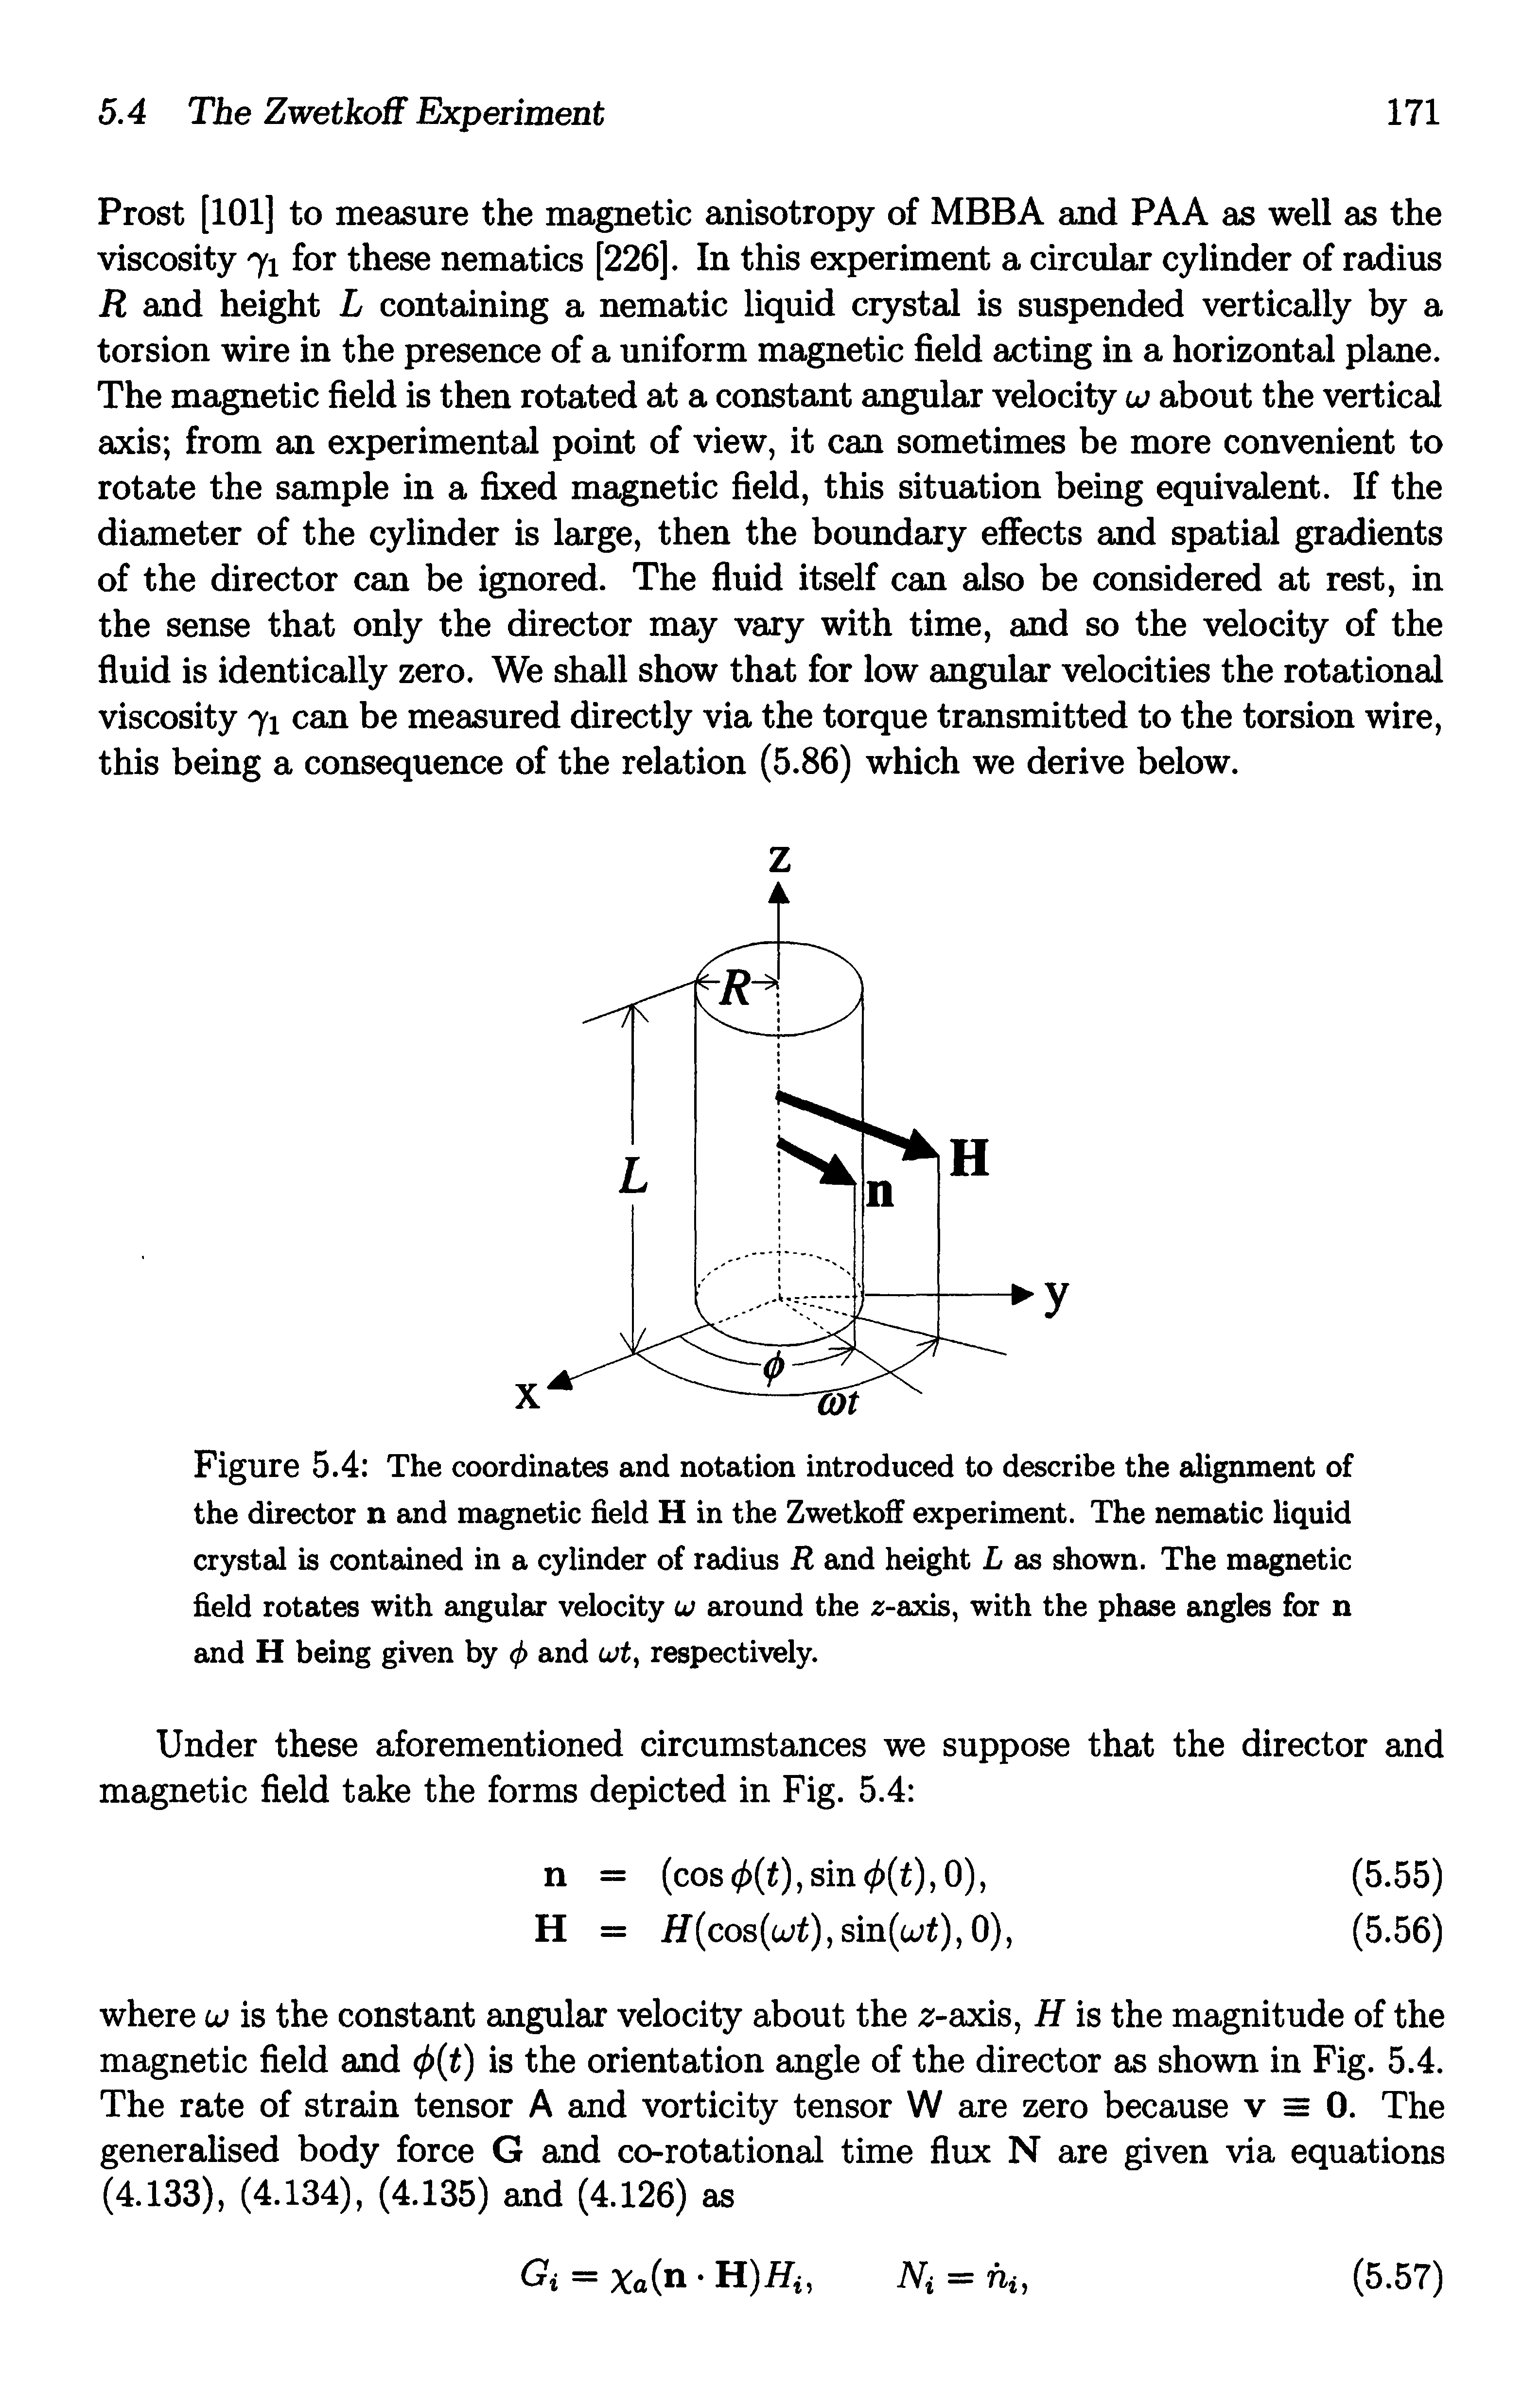 Figure 5.4 The coordinates and notation introduced to describe the alignment of the director n and magnetic field H in the Zwetkoff experiment. The nematic liquid crystal is contained in a cylinder of radius R and height L as shown. The magnetic field rotates with angular velocity u aroimd the 2-axis, with the phase angles for n and H being given by 0 and respectively.